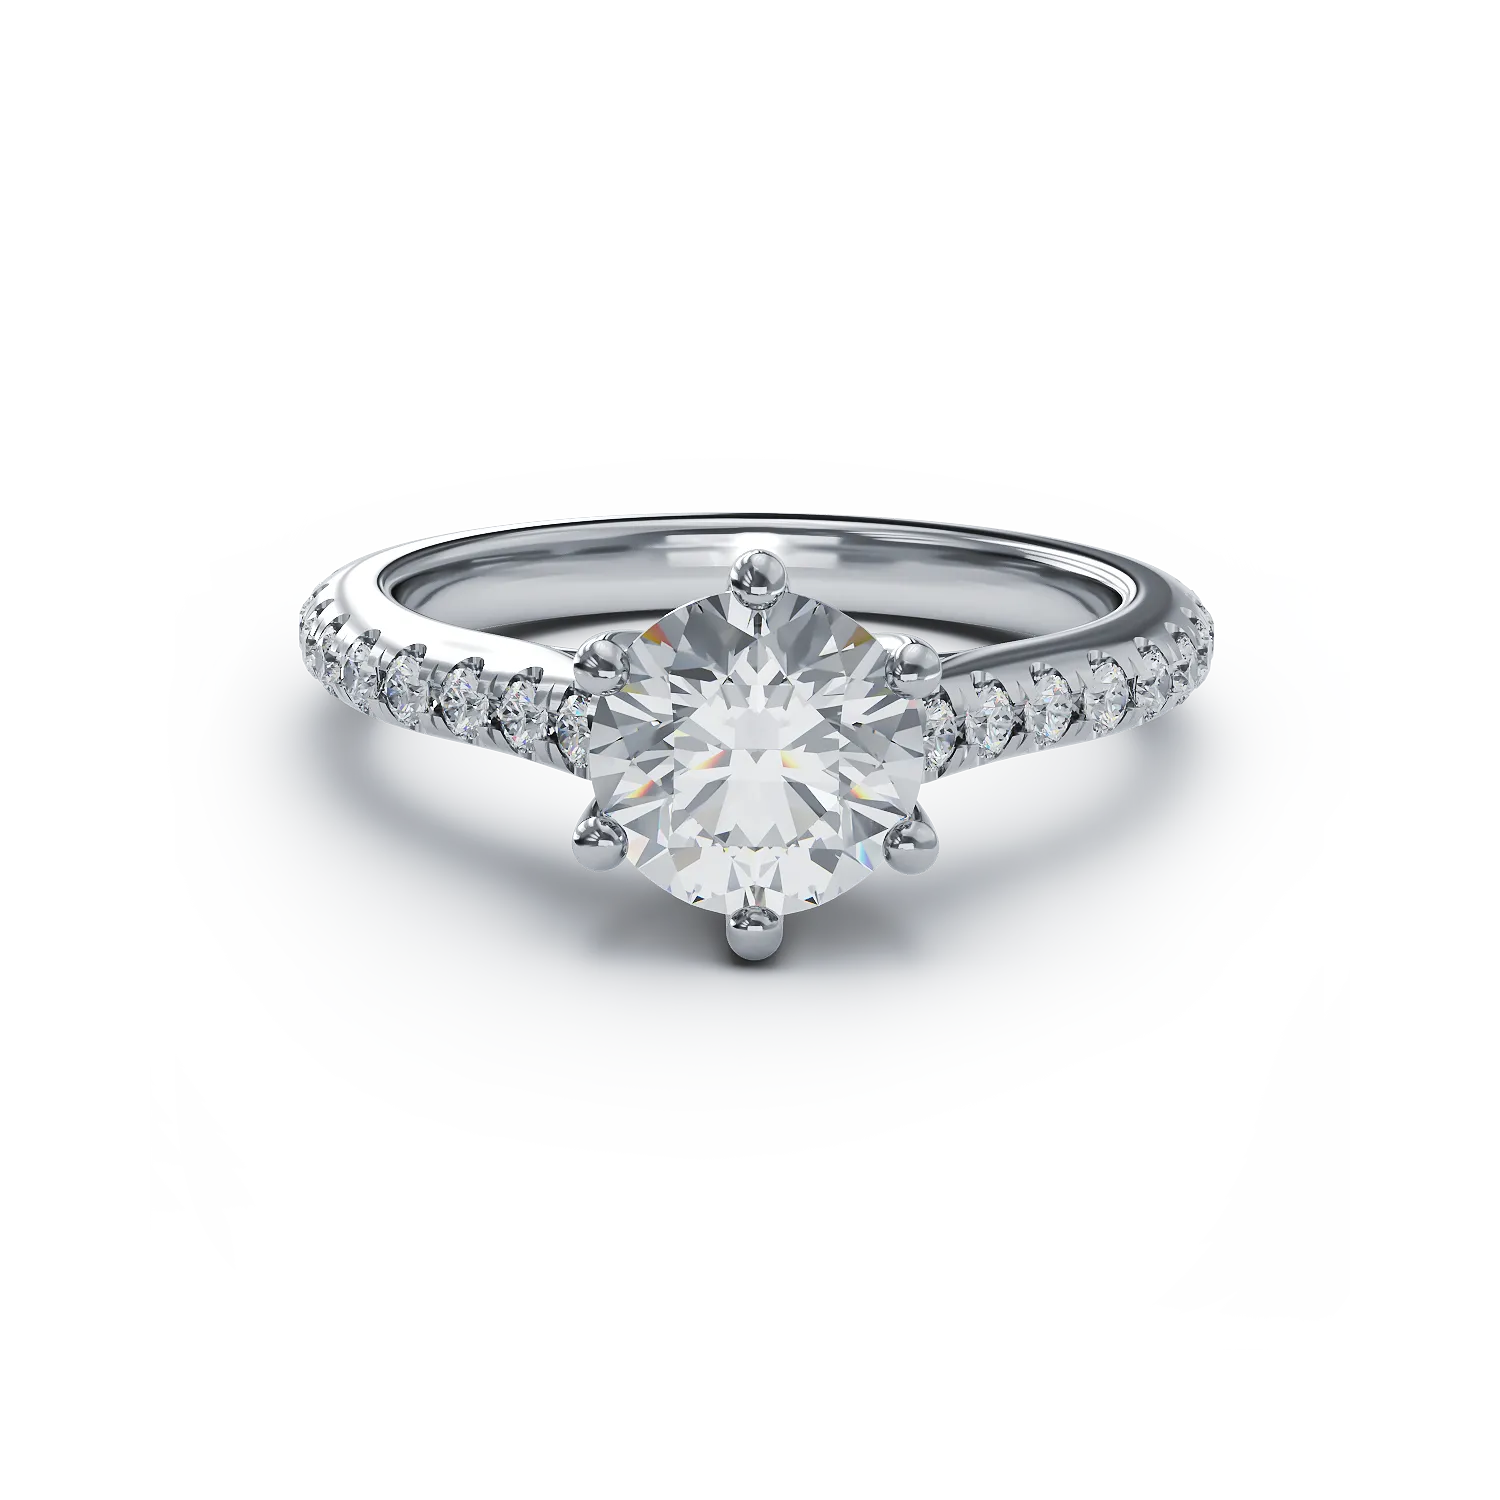 18K white gold engagement ring with 1.31ct diamond and 0.307ct diamonds